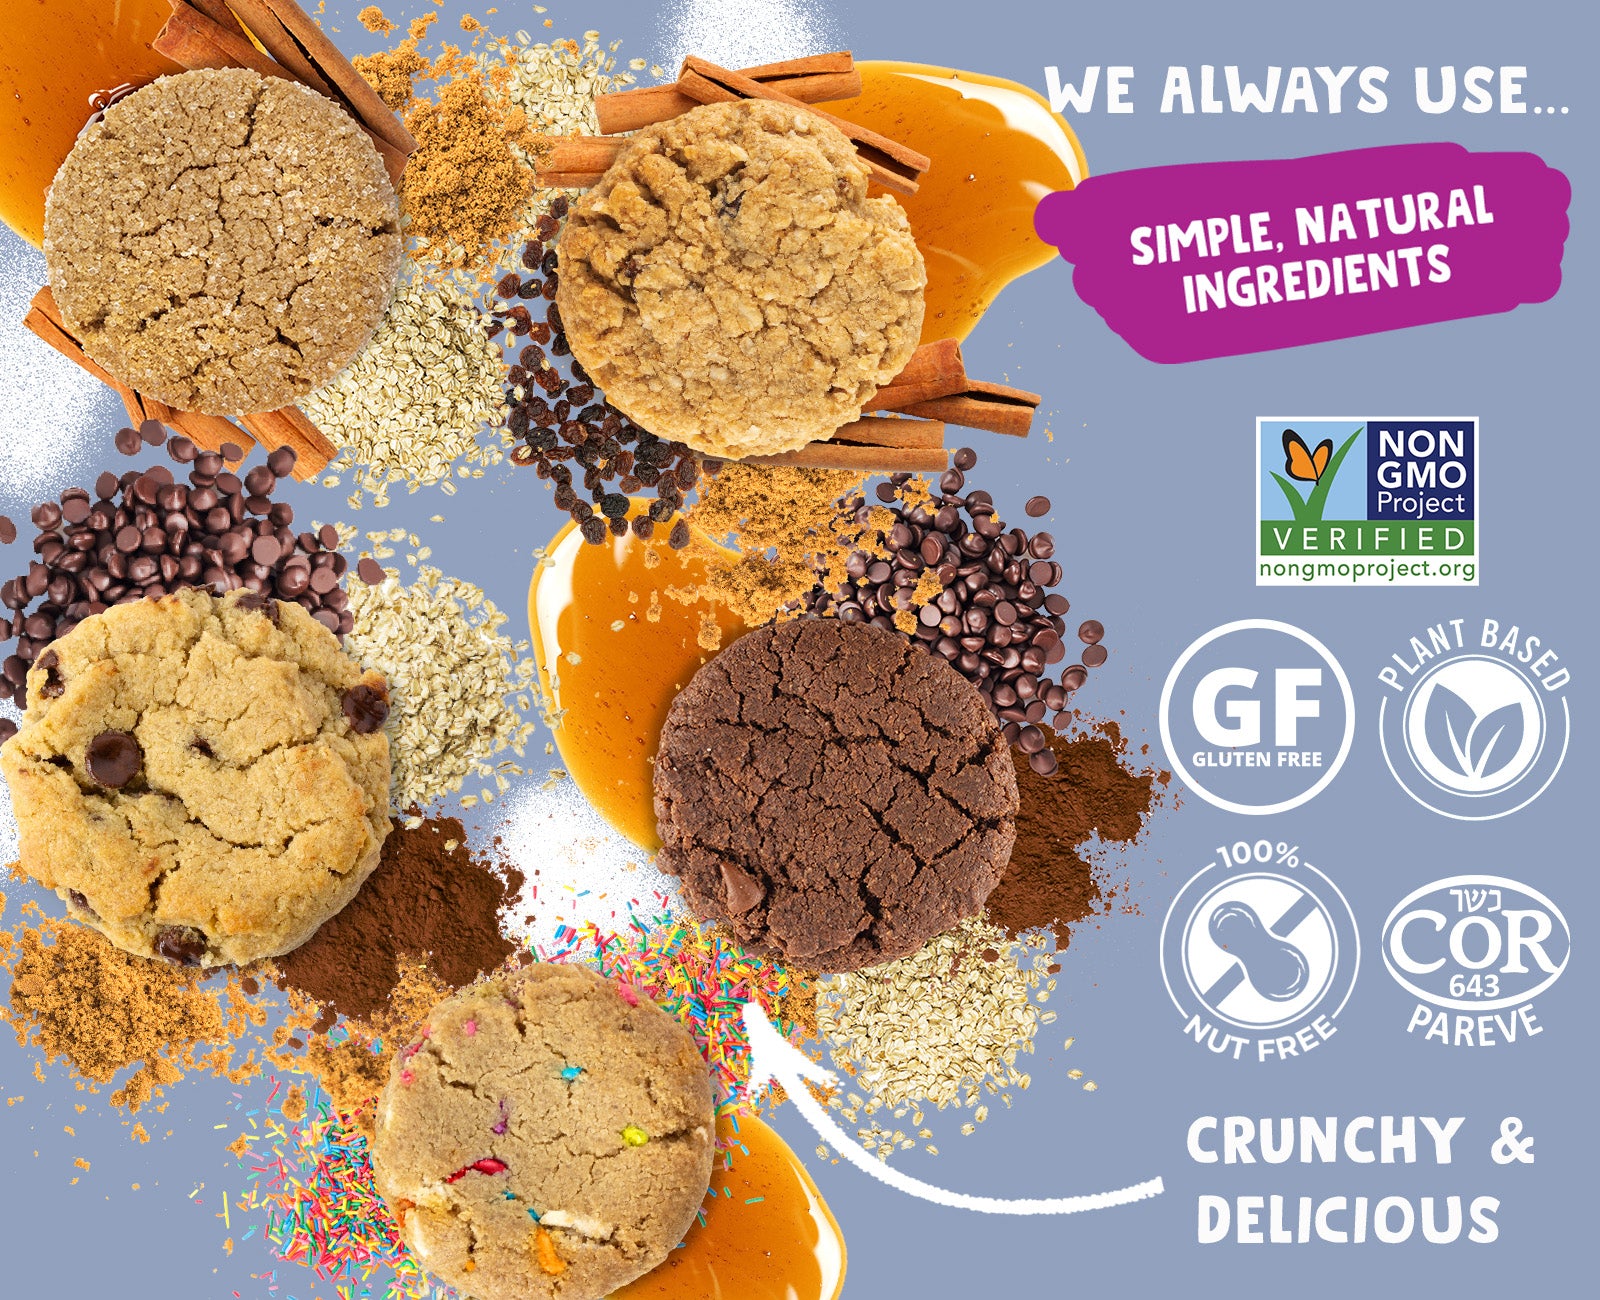 Cookie Lovers Sampler | 6 Boxes - AllergySmart - Green Gourmand Foods Inc.